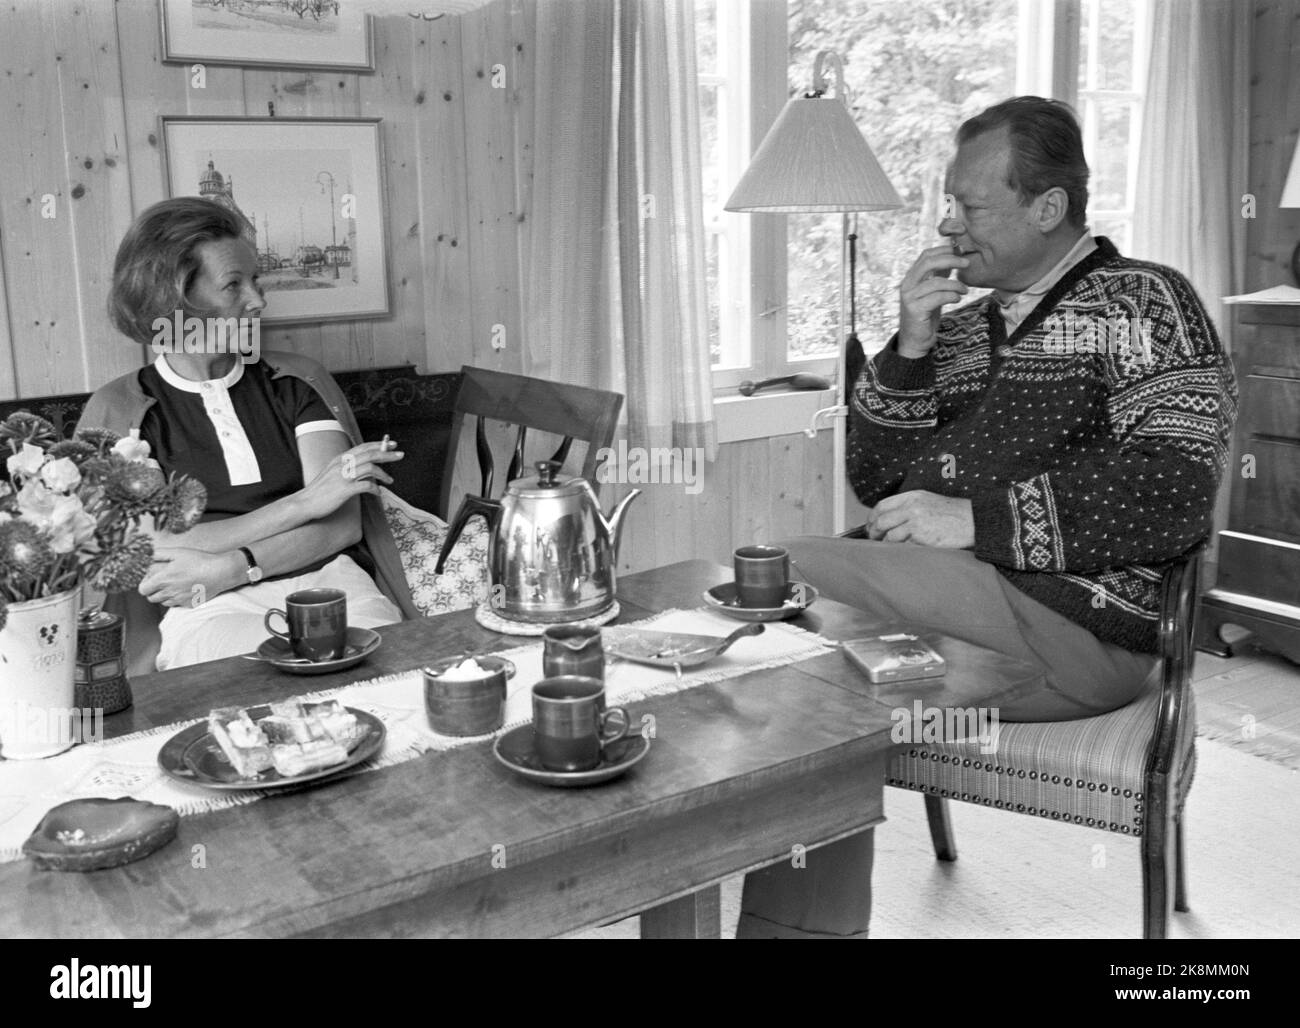 Hamar in the summer of 1970. West Germany's Chancellor Willy Brandt and Mrs. Rut Brandt bought a cabin in Vangsåsen in 1965 at Hamar, and here they spend their summer holidays with the family. Here the couple relaxes in the sofa, with coffee, pastry and smoke. Photo: Ivar Aaserud / Current / NTB Stock Photo